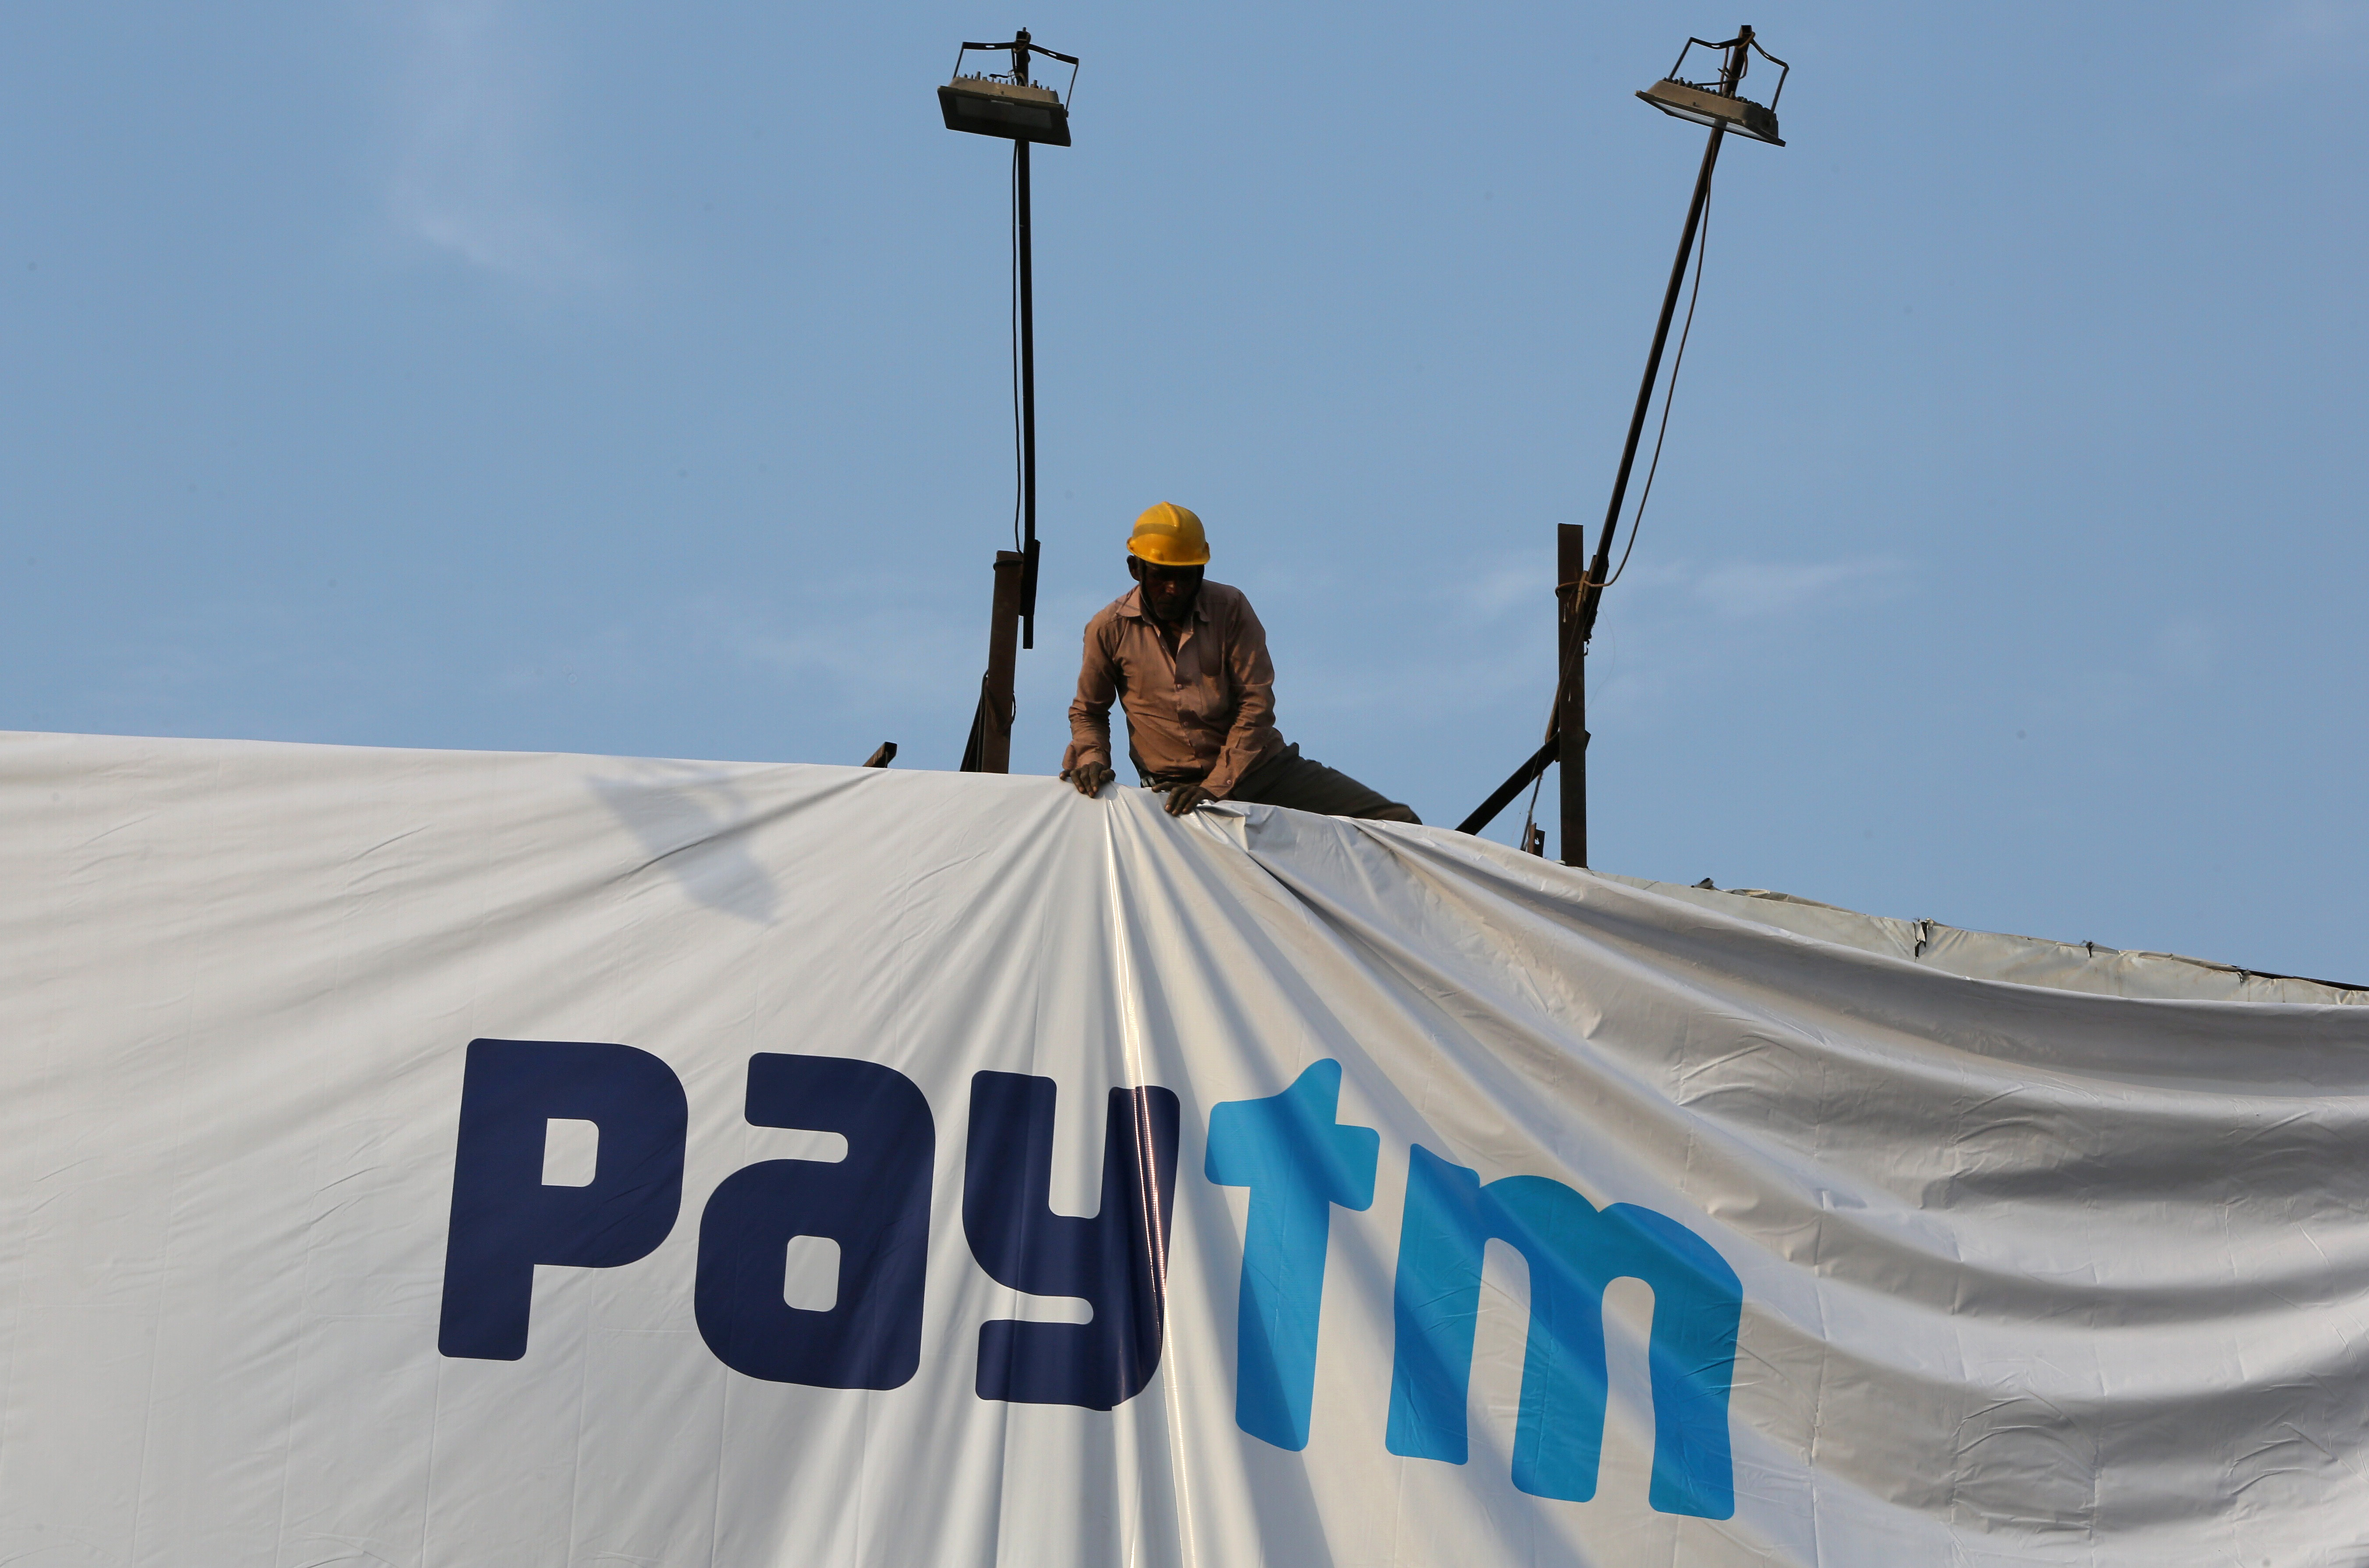 A worker adjusts a hoarding of Paytm, a digital payments firm, in Ahmedabad, India, January 31, 2019. Picture taken January 31, 2019. REUTERS/Amit Dave - RC1C2463DEA0